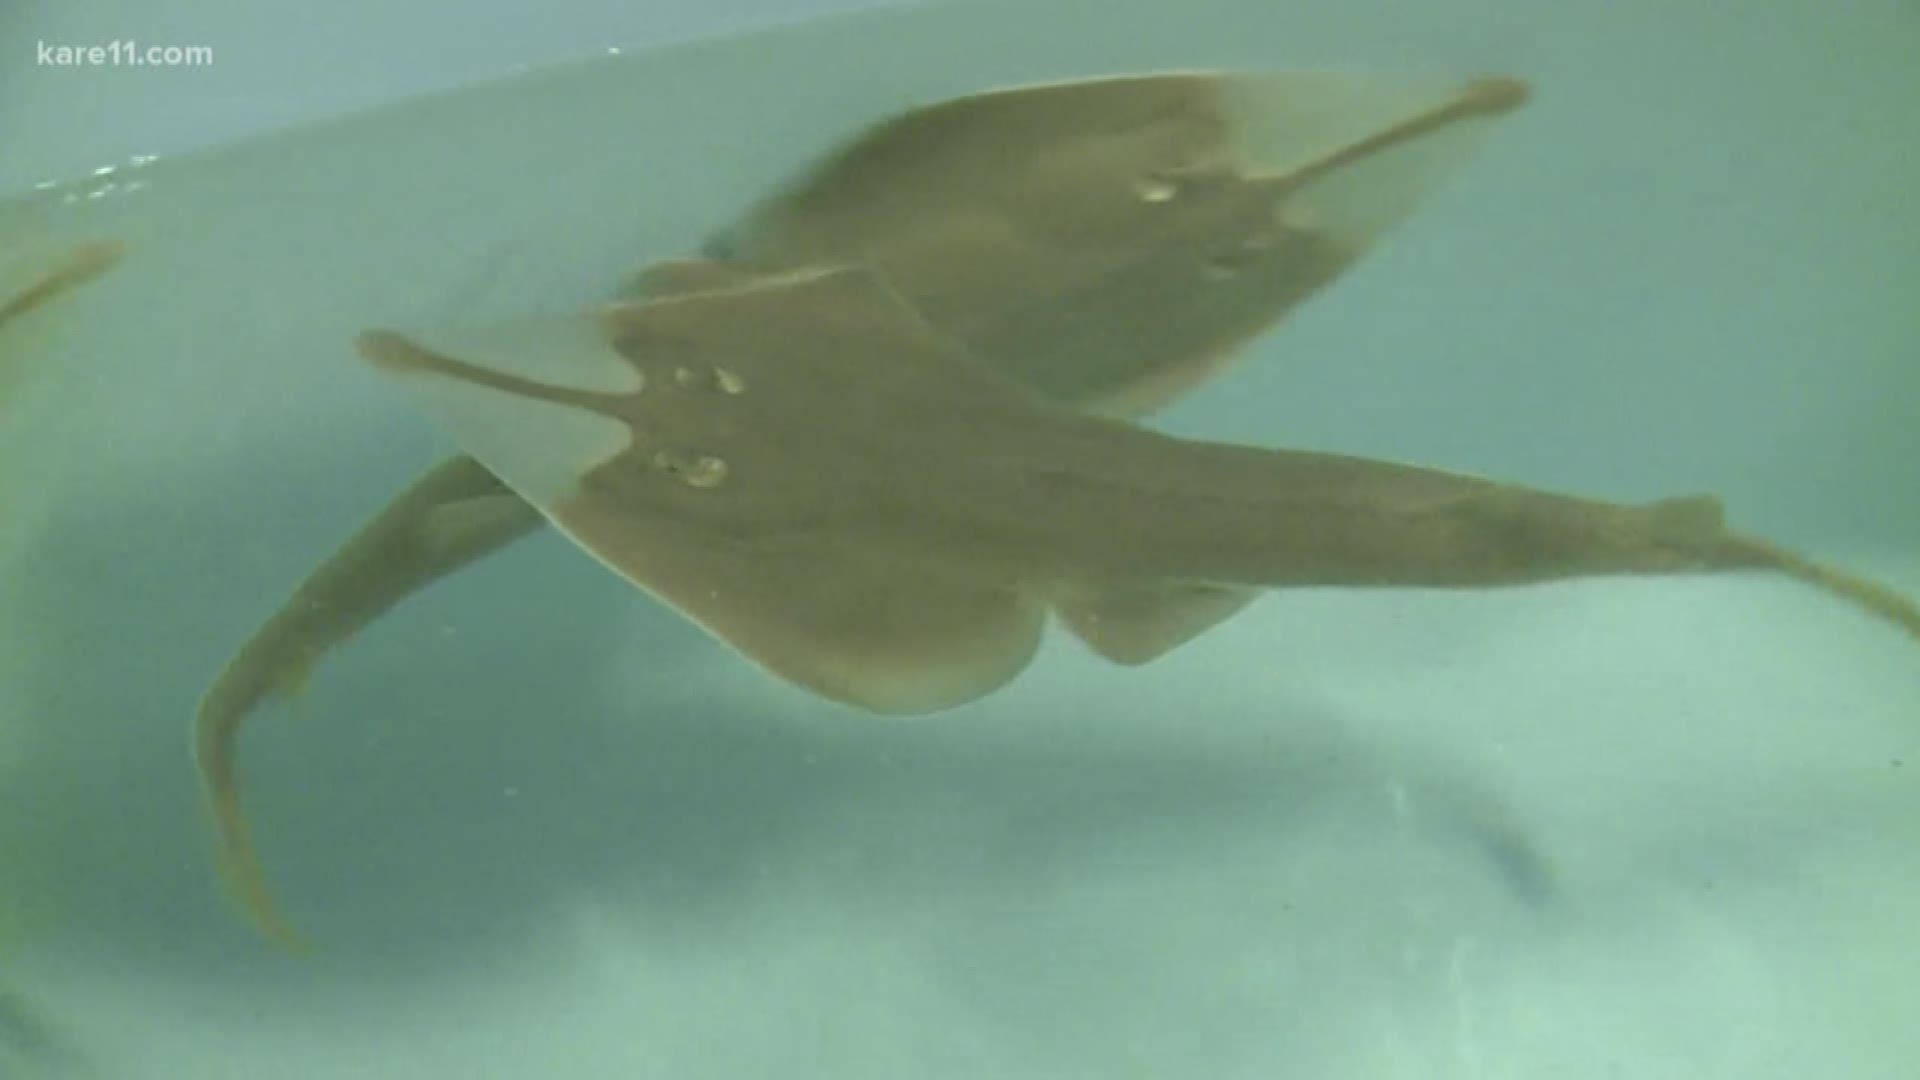 Giant guitarshark babies are on display at the Mall of America's SEA LIFE for the first time.